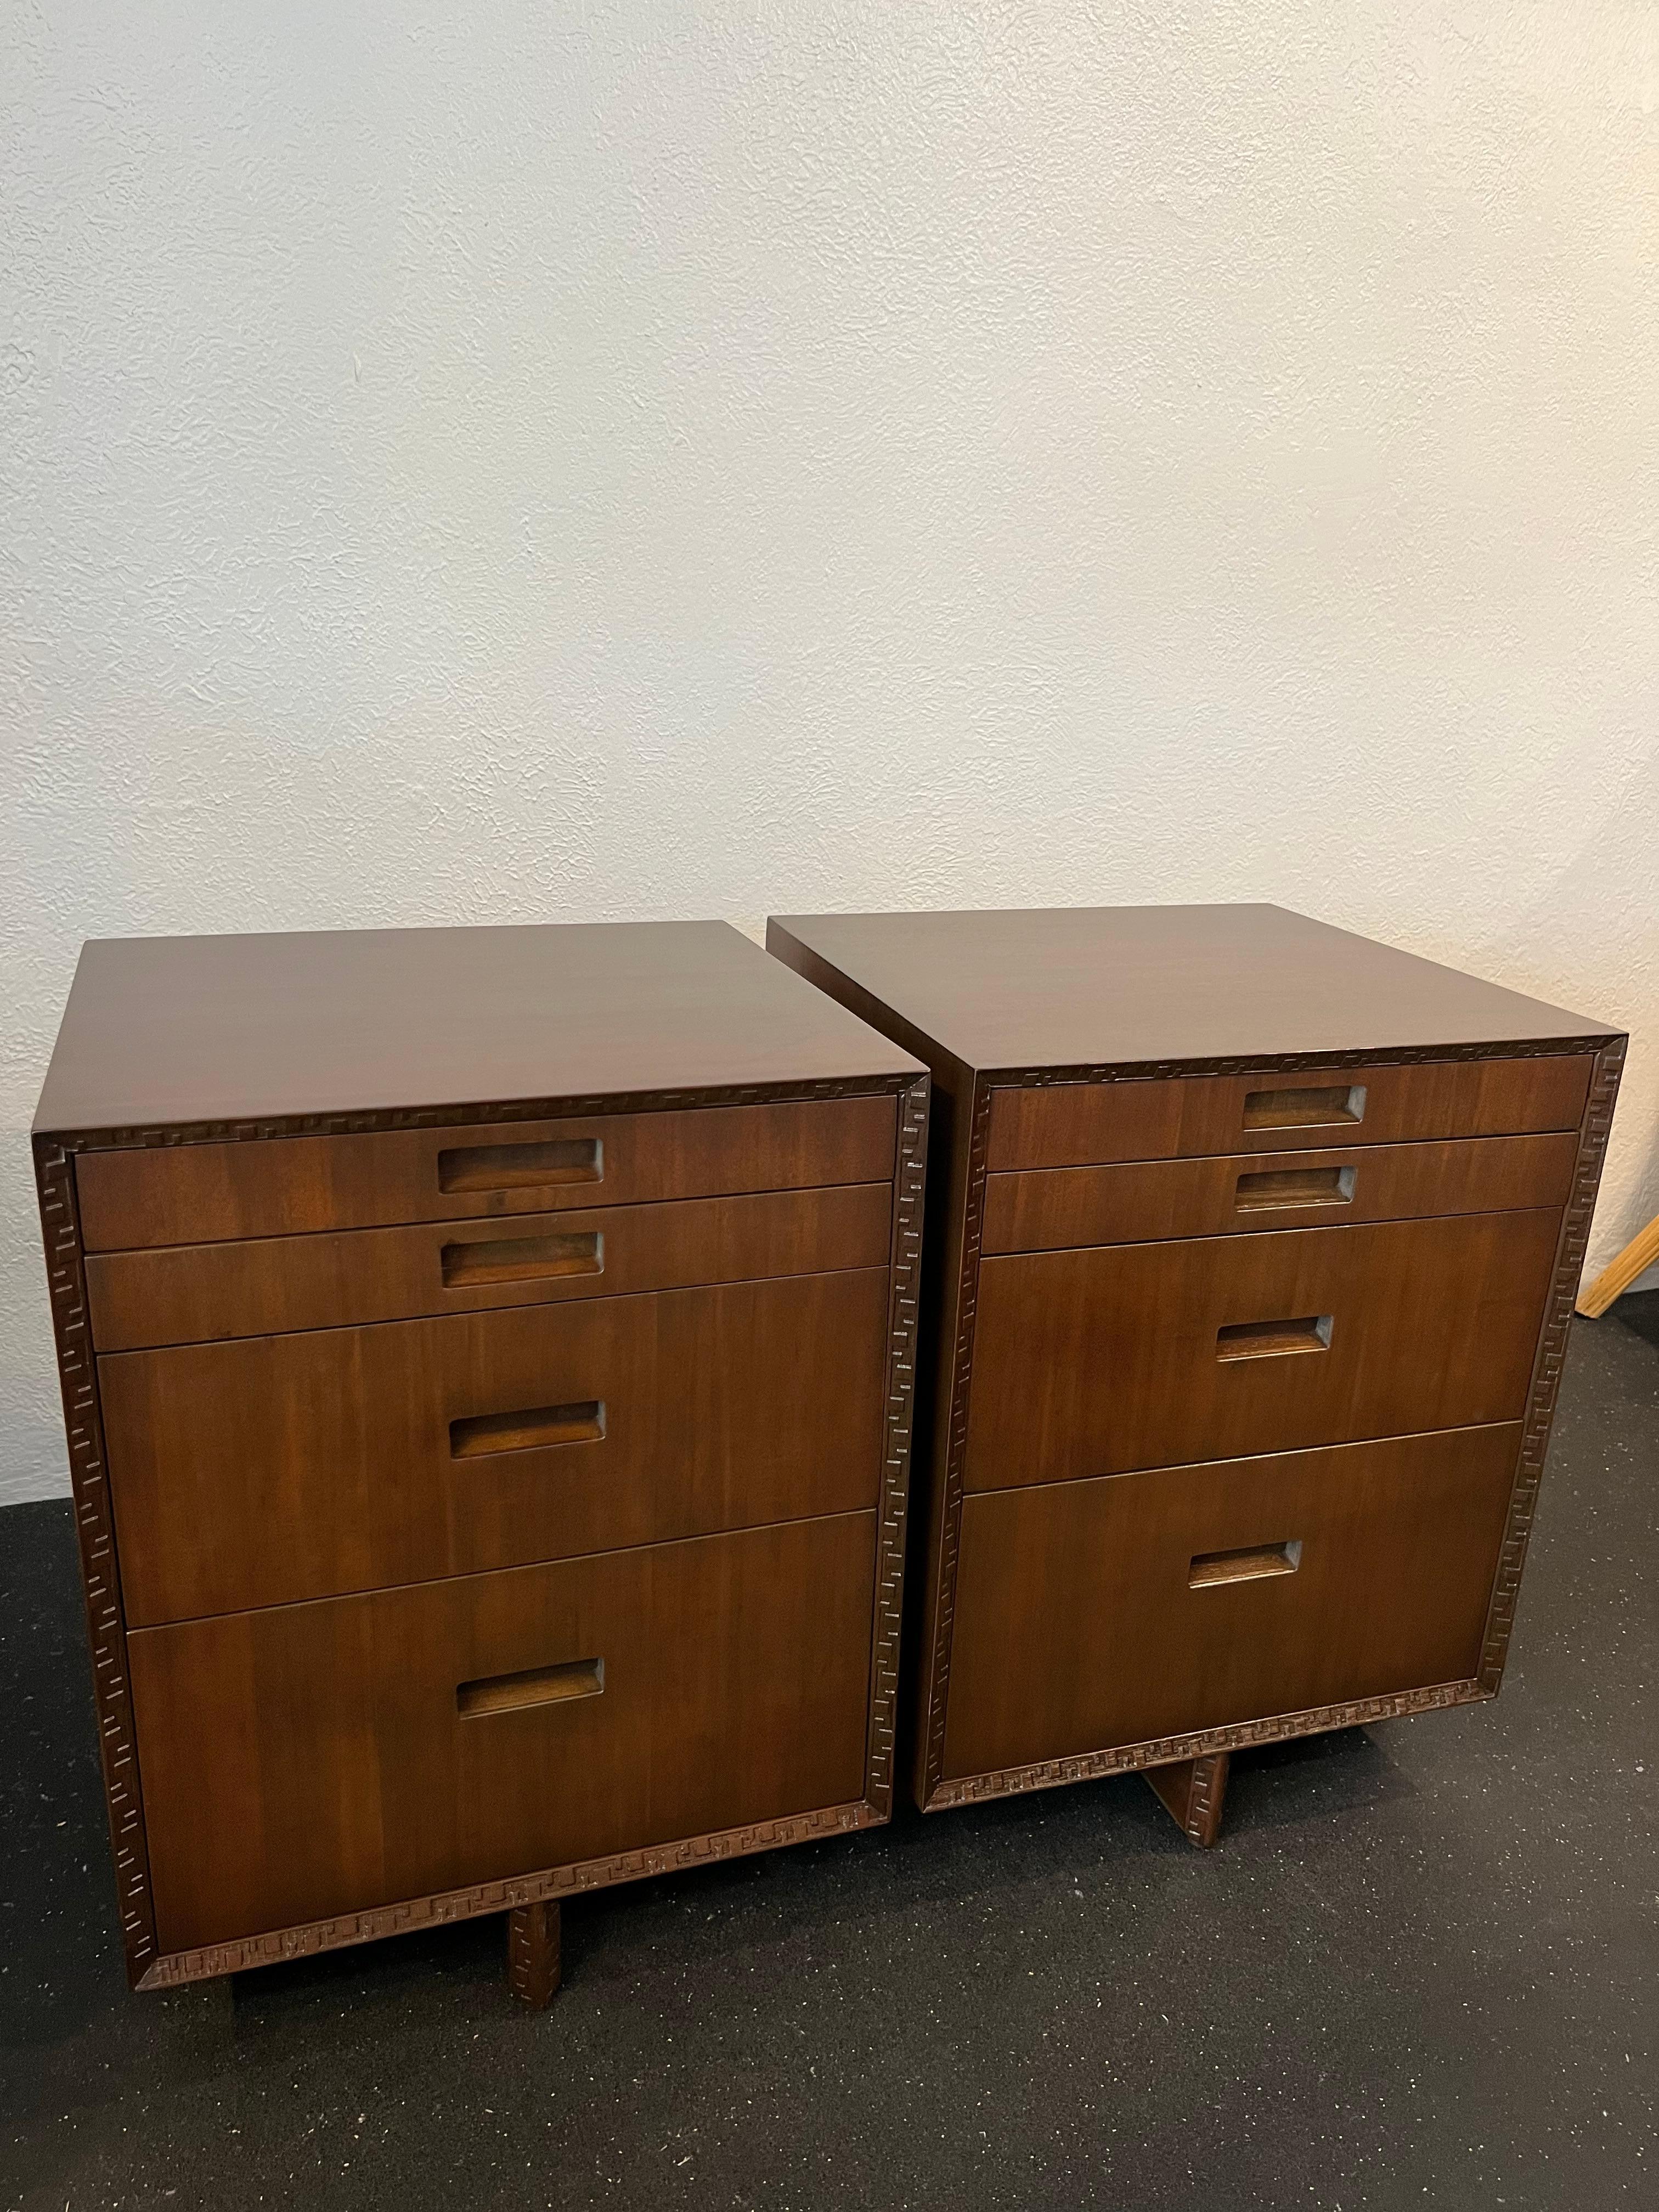 Frank Lloyd Wright for Heritage Henredon “Taliesin” pair of cabinets. Recently refinished. Additional photos available upon request. Matching dresser, side table and mirror also available separately.

Would work well in a variety of interiors such